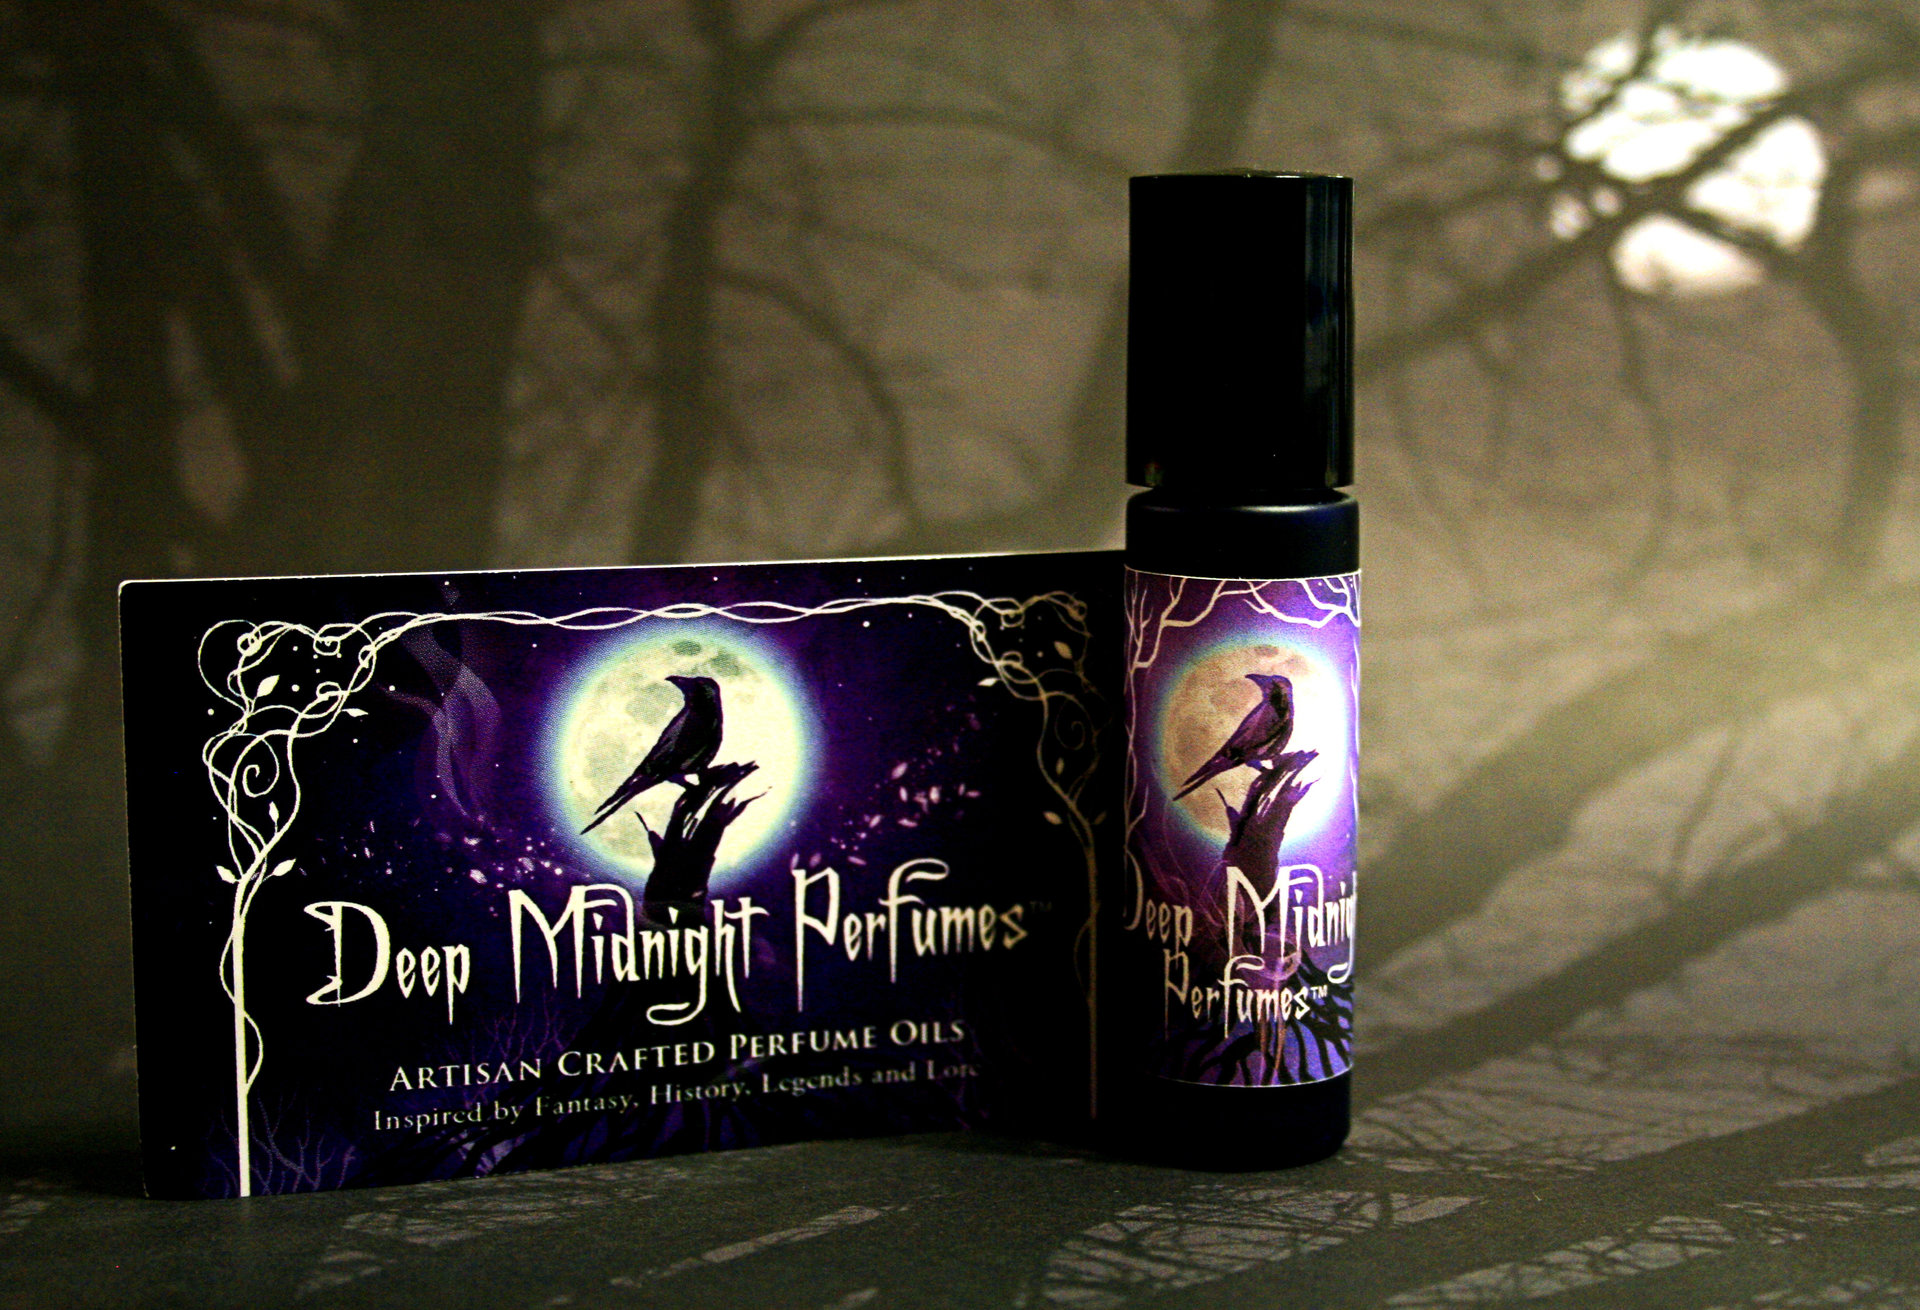 FOREST DAUGHTER Perfume Oil - Inspired by Tauriel - Tulips, Jasmine, Ylang-ylang, Sandalwood, Black Currant, Vetiver, Cocoa  - The Hobbit